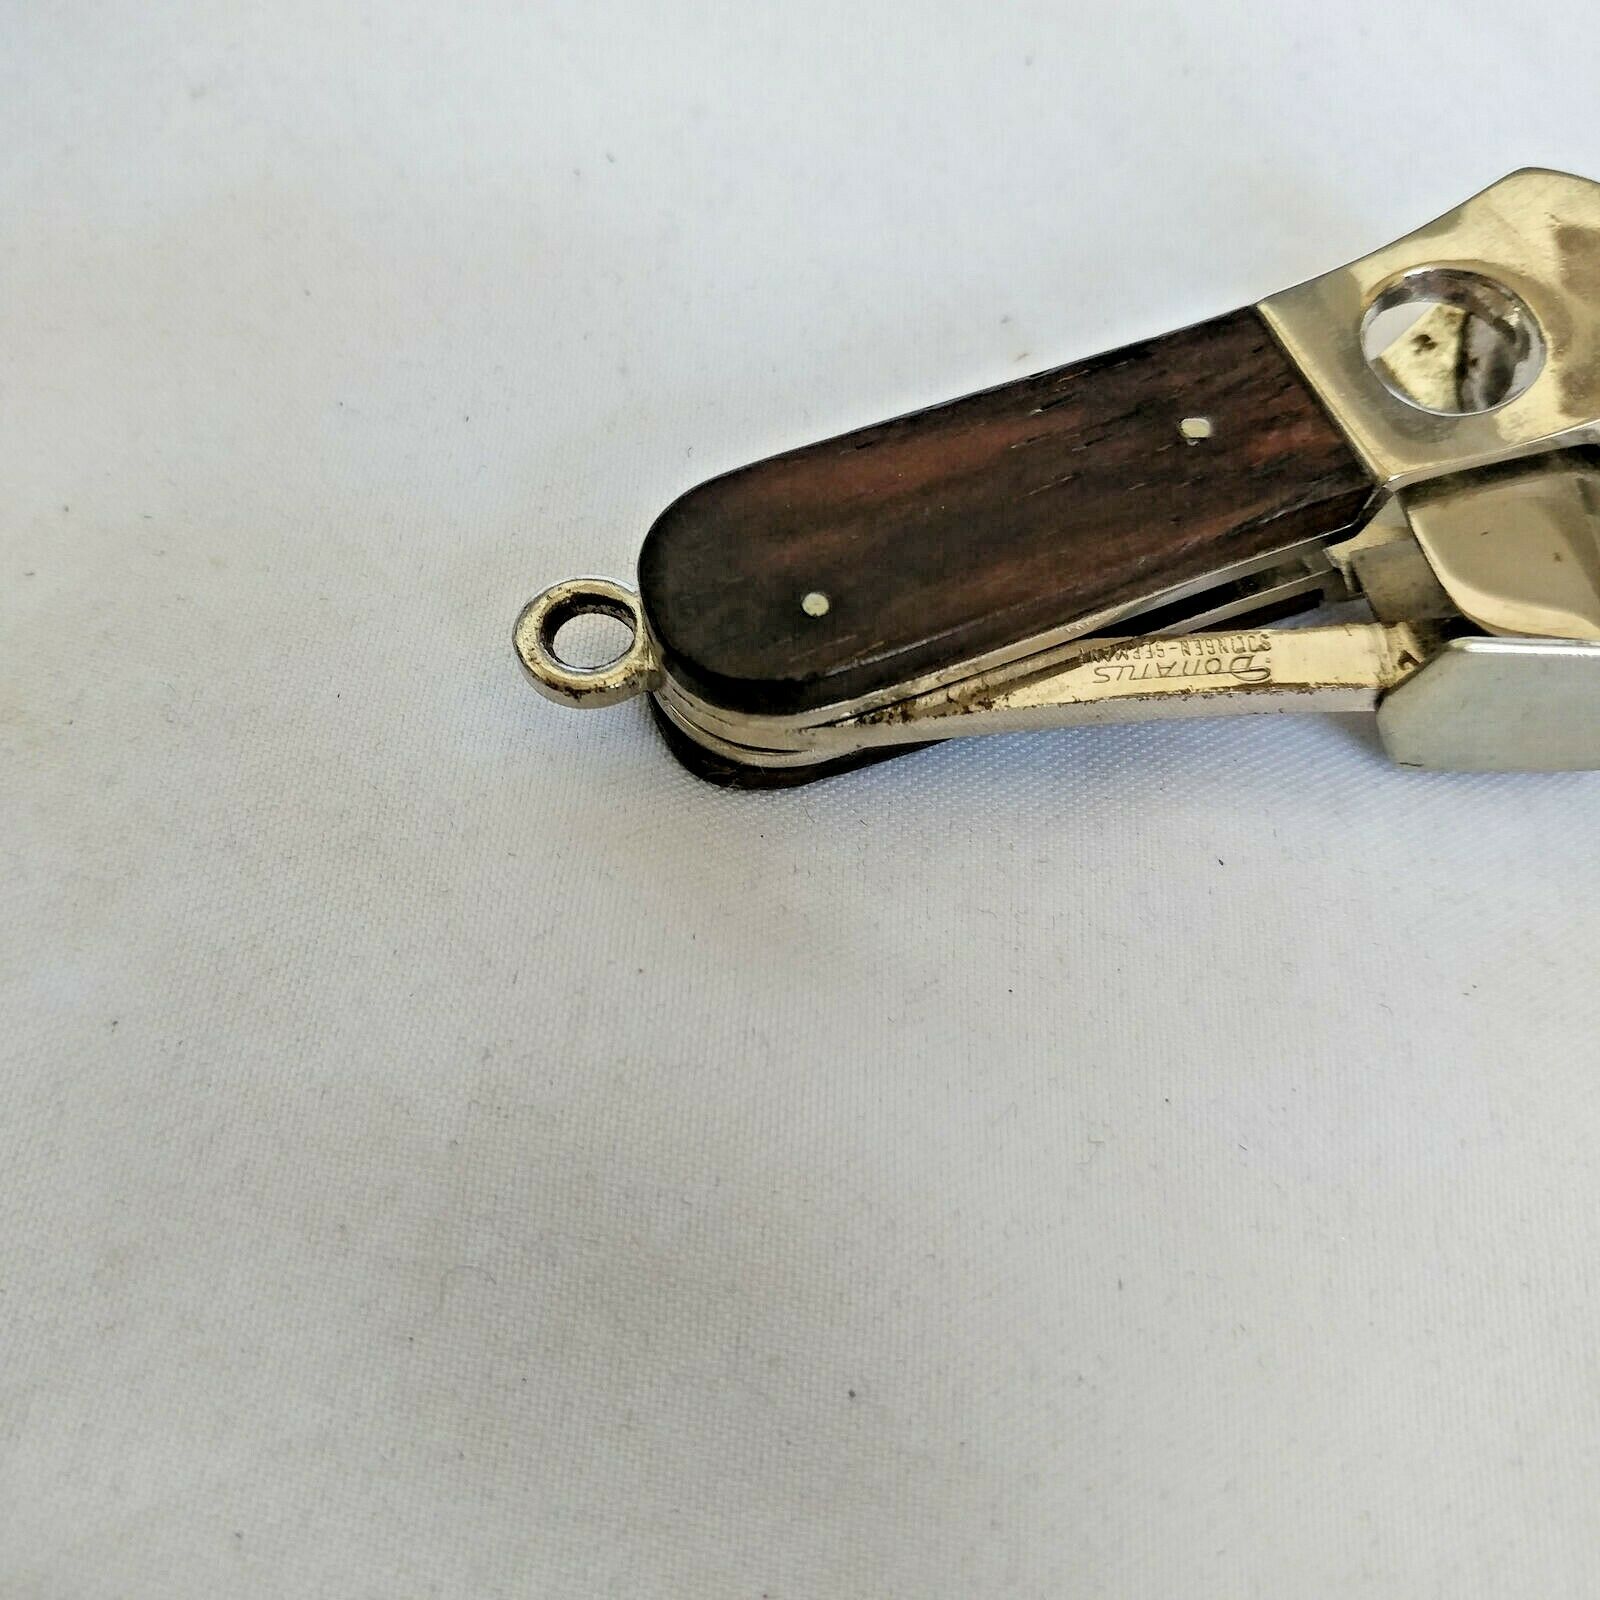 Vintage Cigar Cutter/Punch w/ Box Opener and Wooden Handle